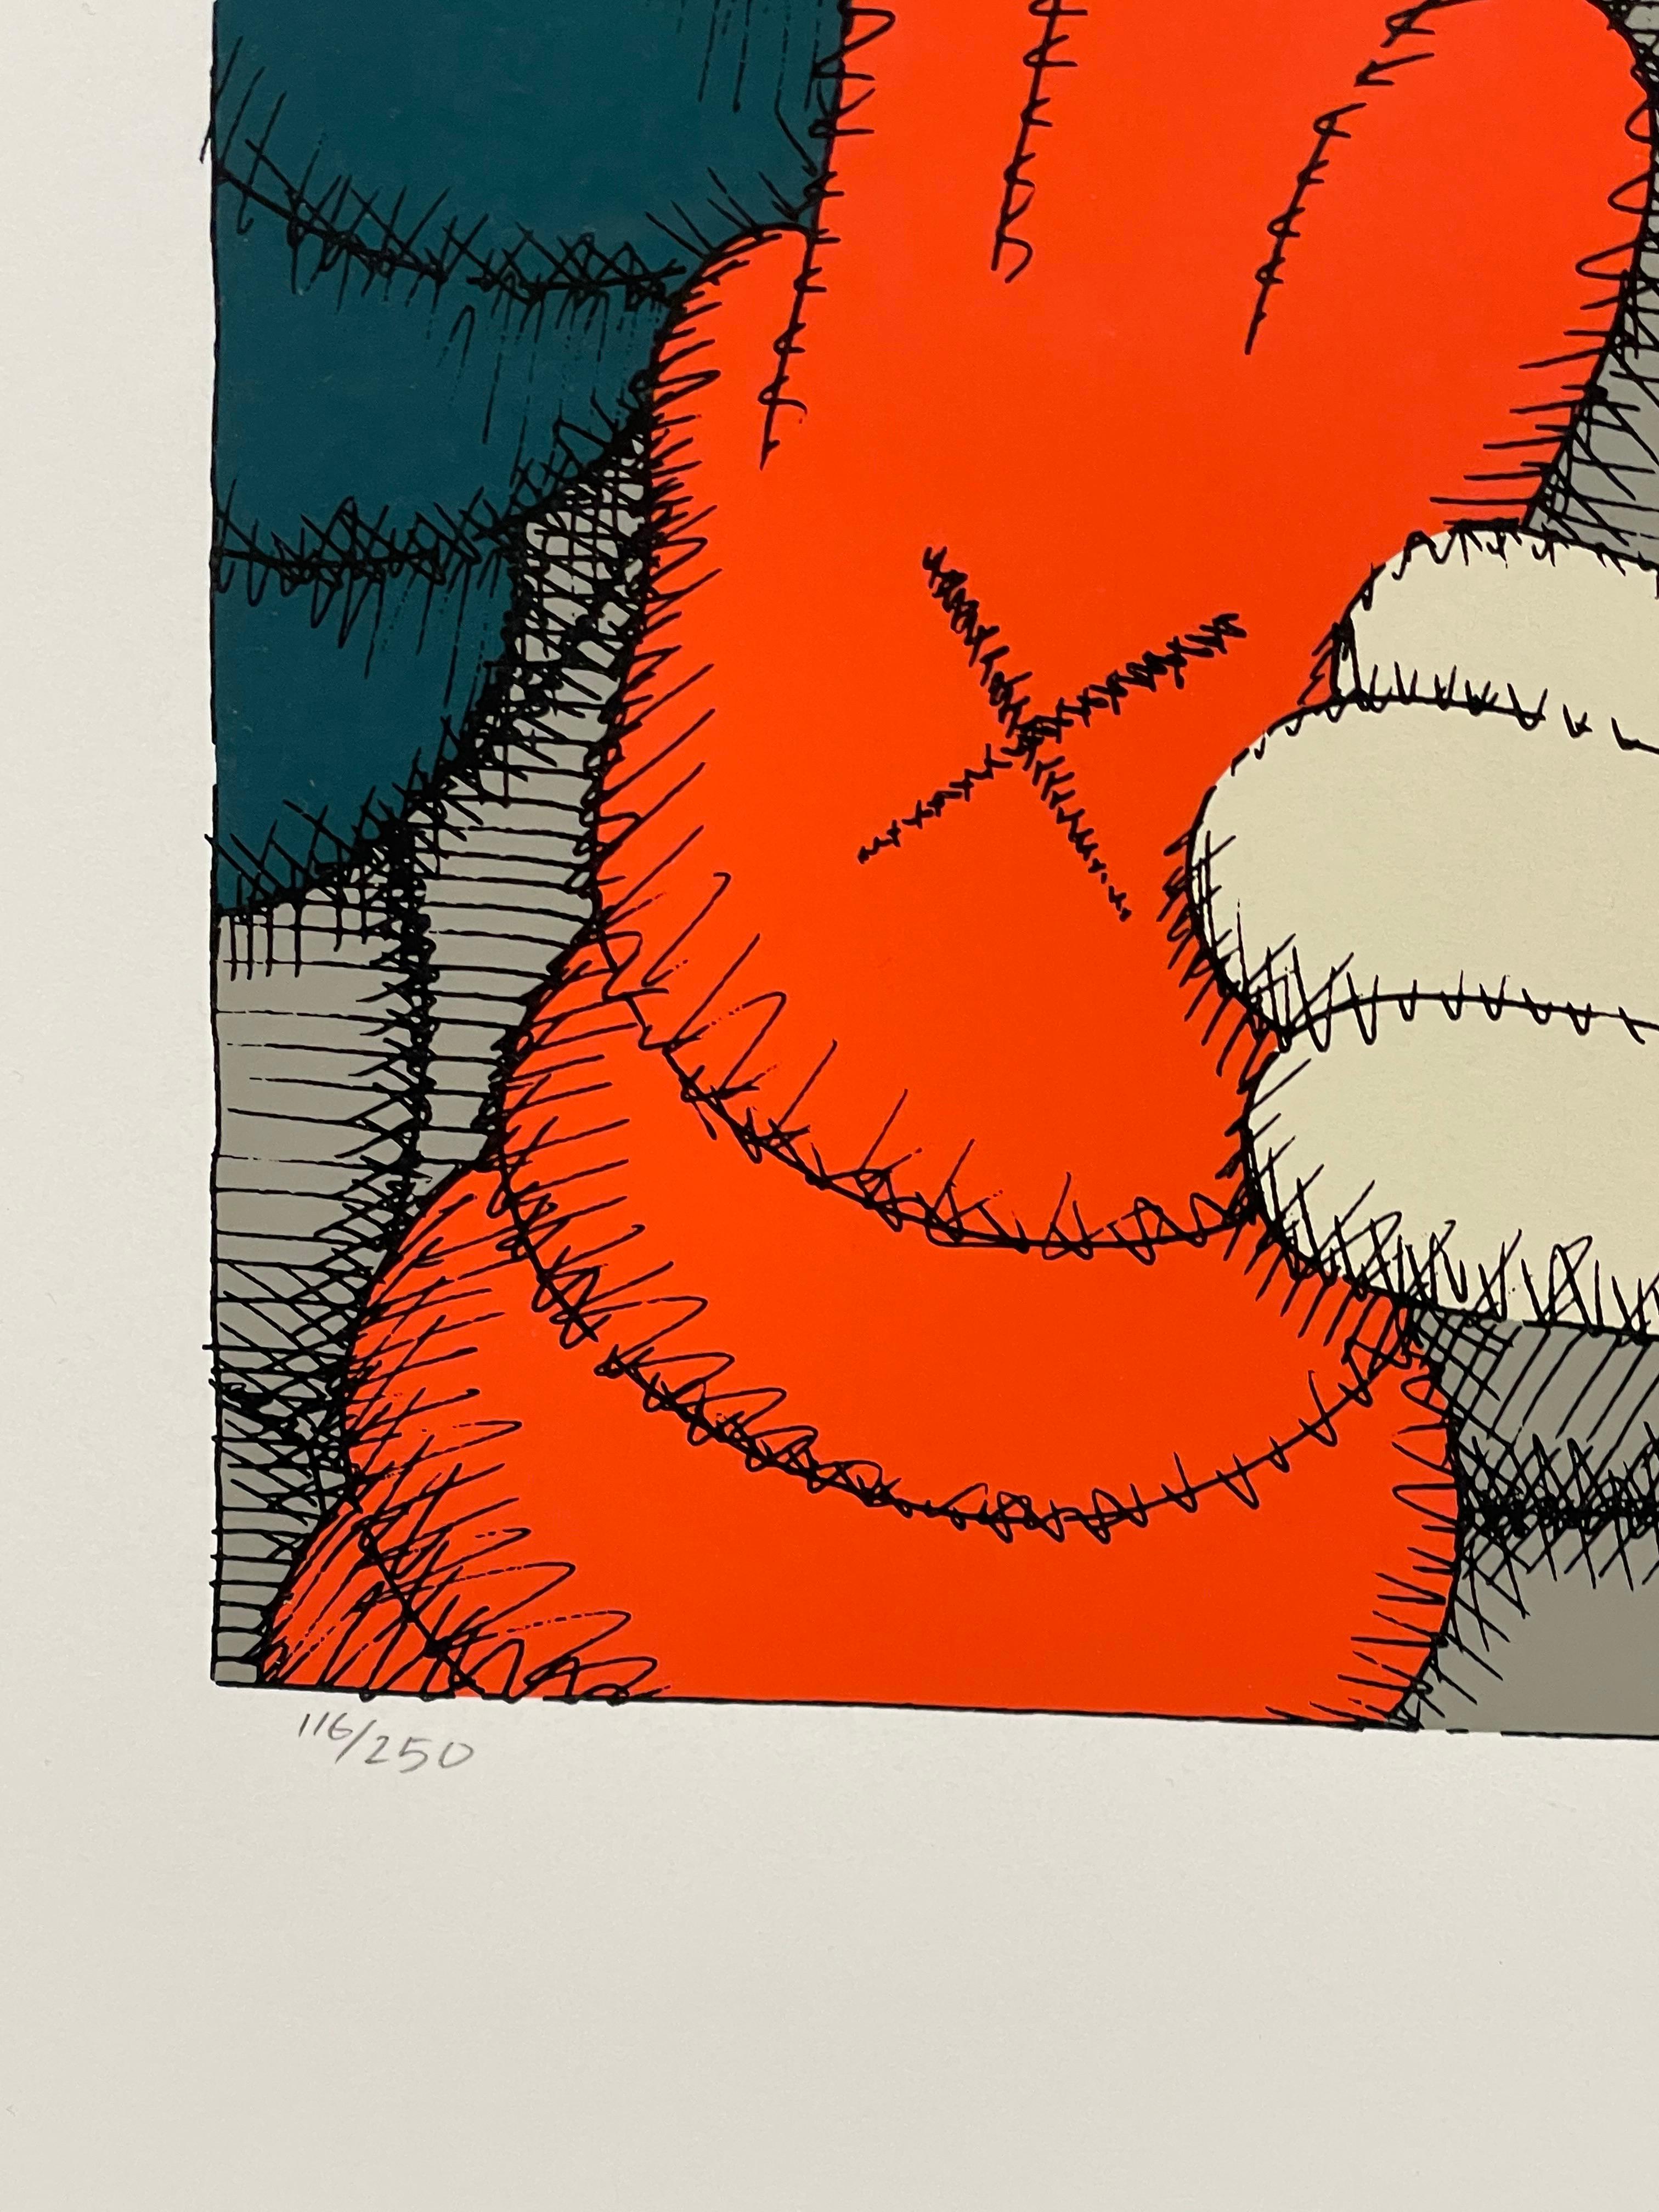 Artist:  Kaws
Title:  Urge 
Size:  17 x 12.5 Inches (90 x 70 cm)
Medium:  Screen Print on Fine Art Paper
Edition:  116250
Year:  2020
Notes: Hand Signed and Numbered by the Artist. The Artwork is in Excellent Condition Floating on White Acid Free